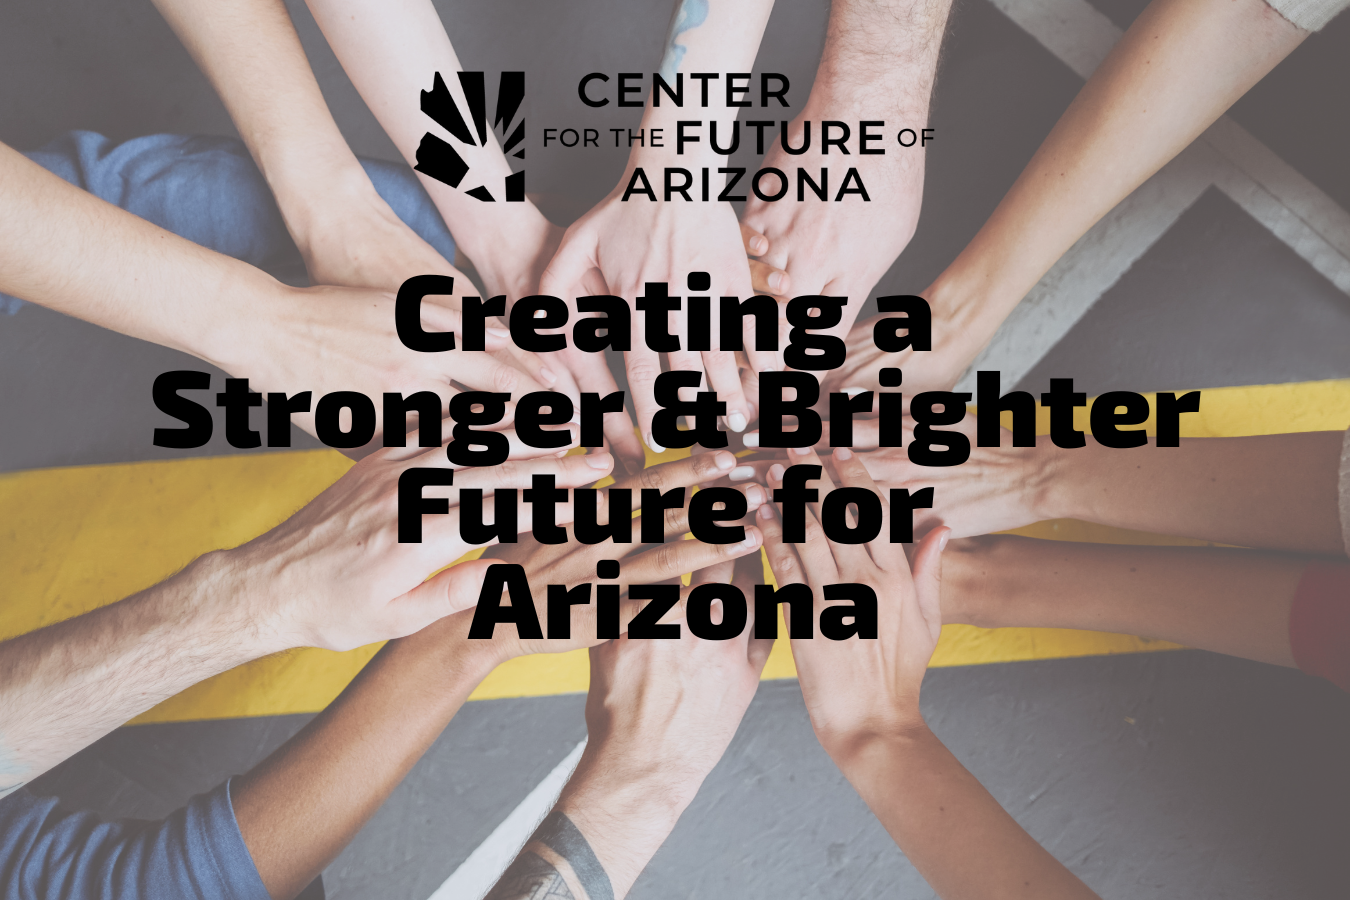 Edge Factor and the Center for the Future Of Arizona Share a Common Mission